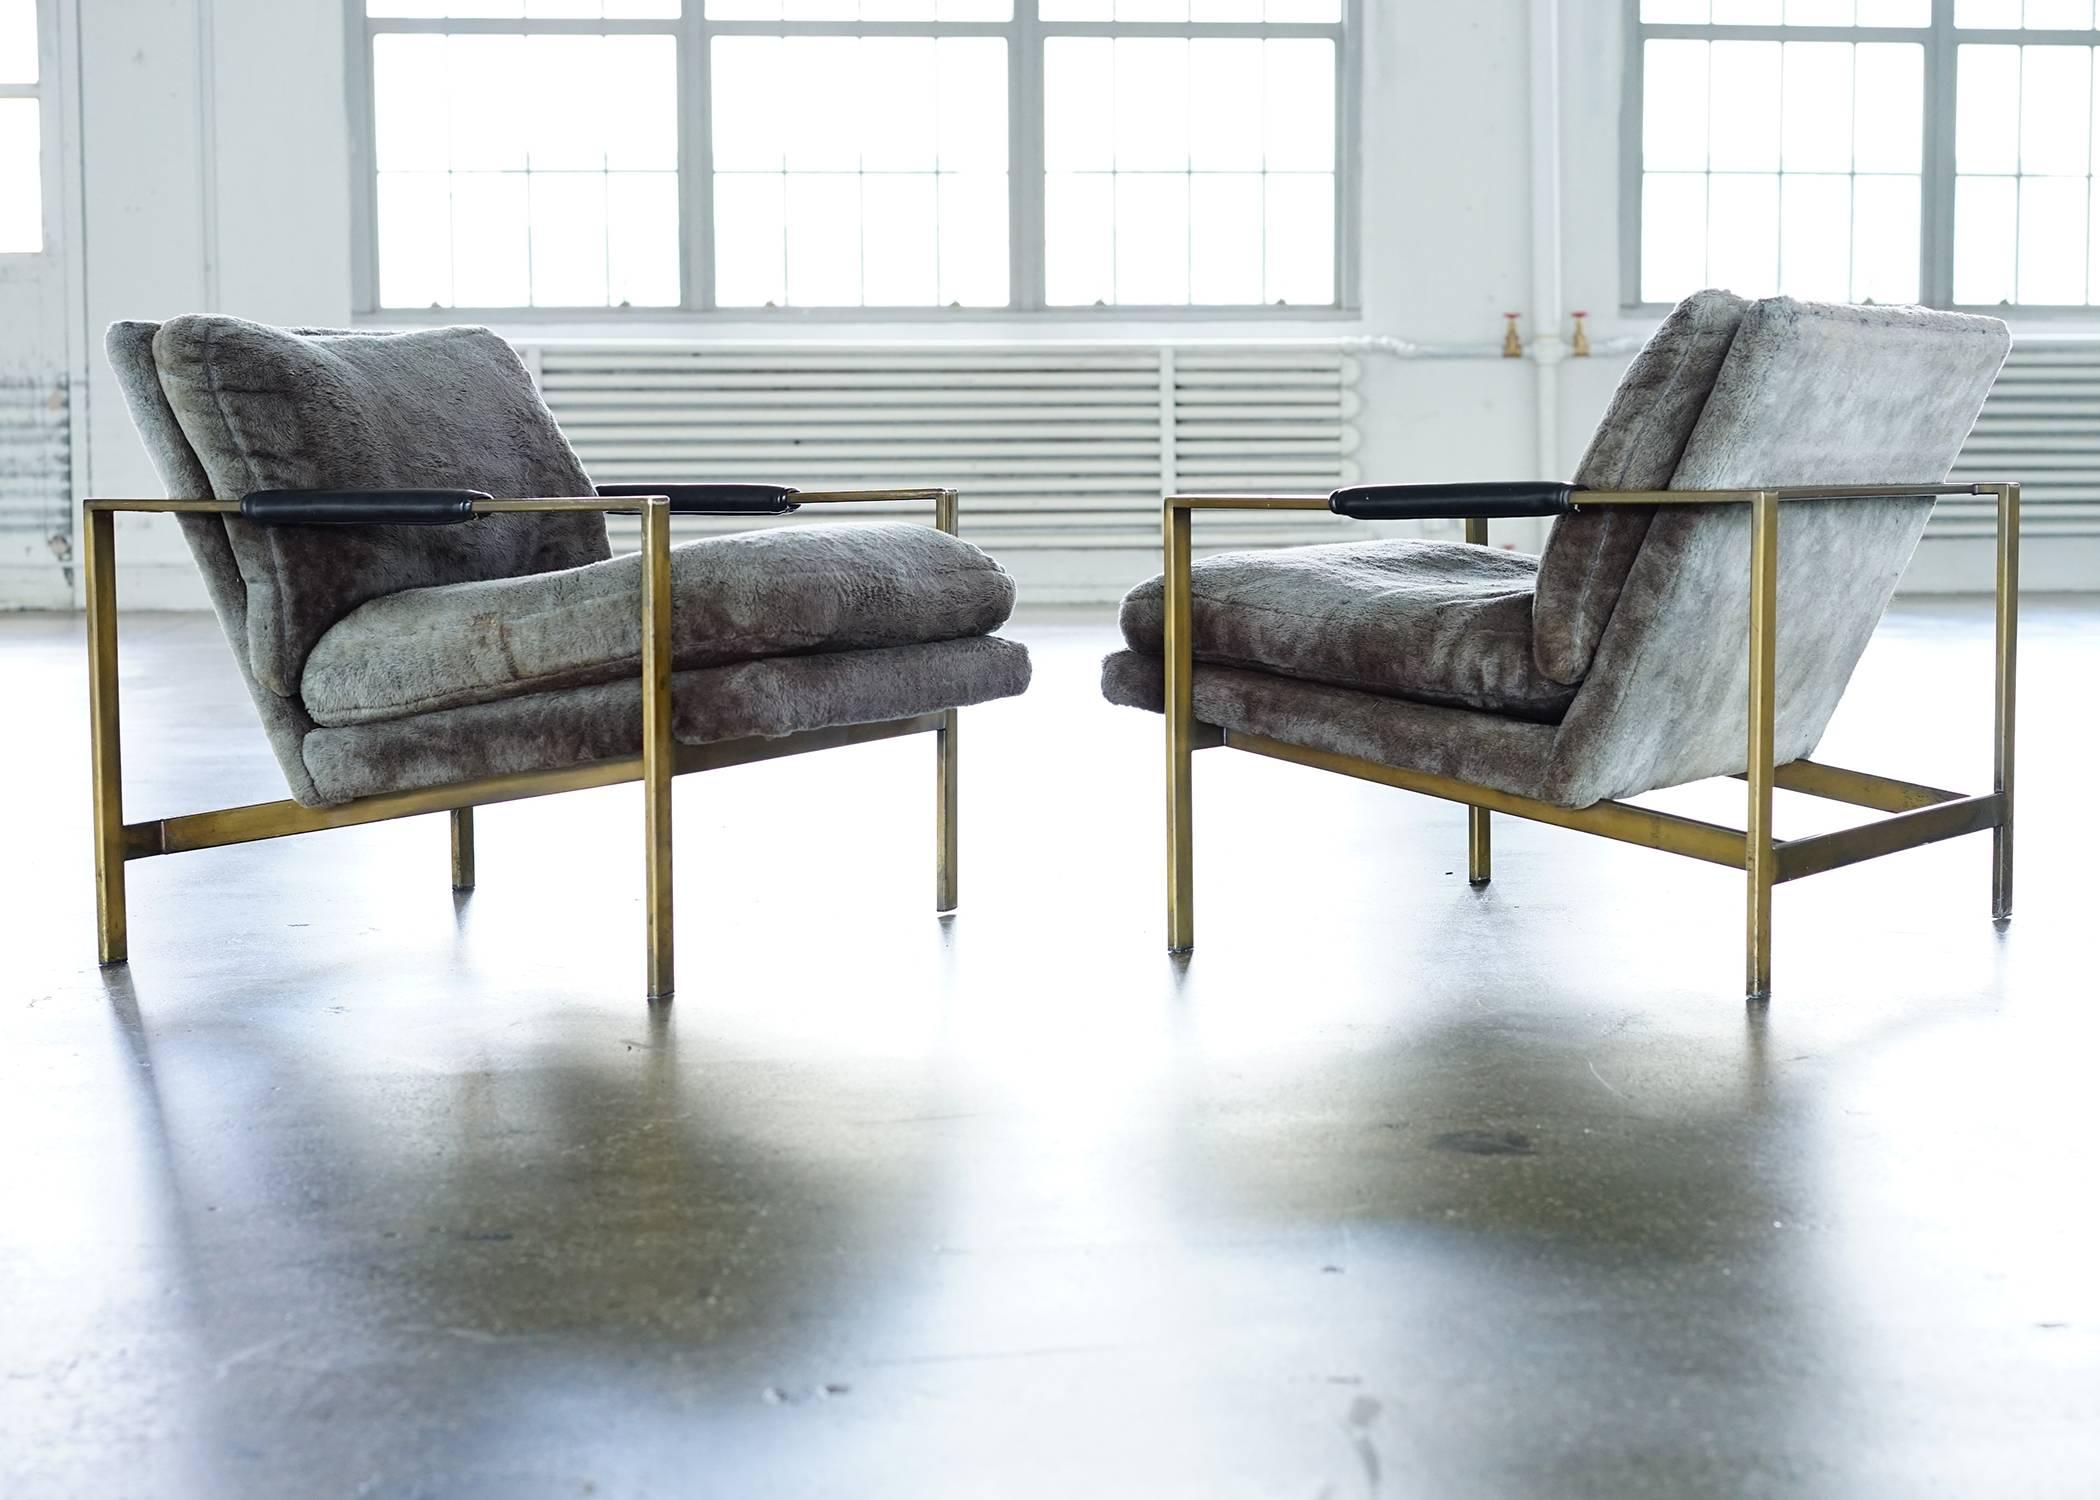 Early production model 951-103 with most desirable bronze finish on steel flat bar frame. Original gray faux fur upholstery and black vinyl upholstered arms. A Fine pair manufactured by Thayer Coggin in High Point, North Carolina.